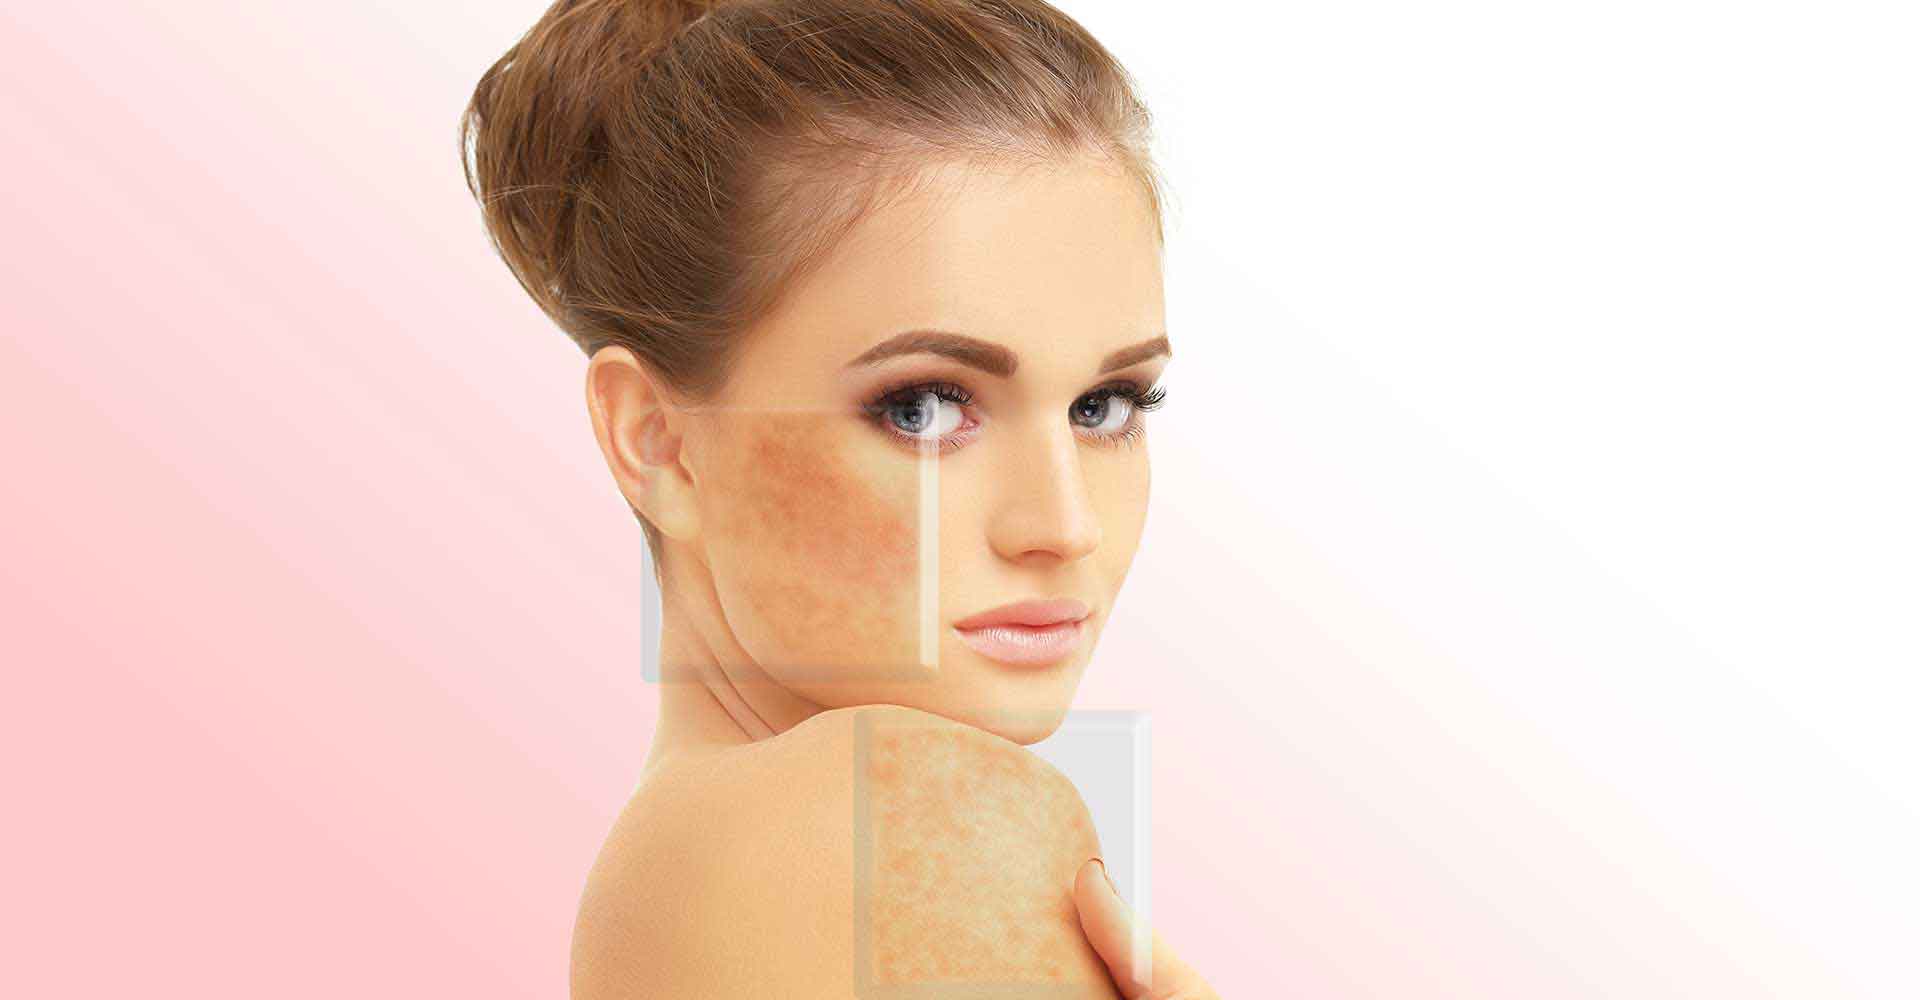 Make those dark spots disappear in a jiffy!